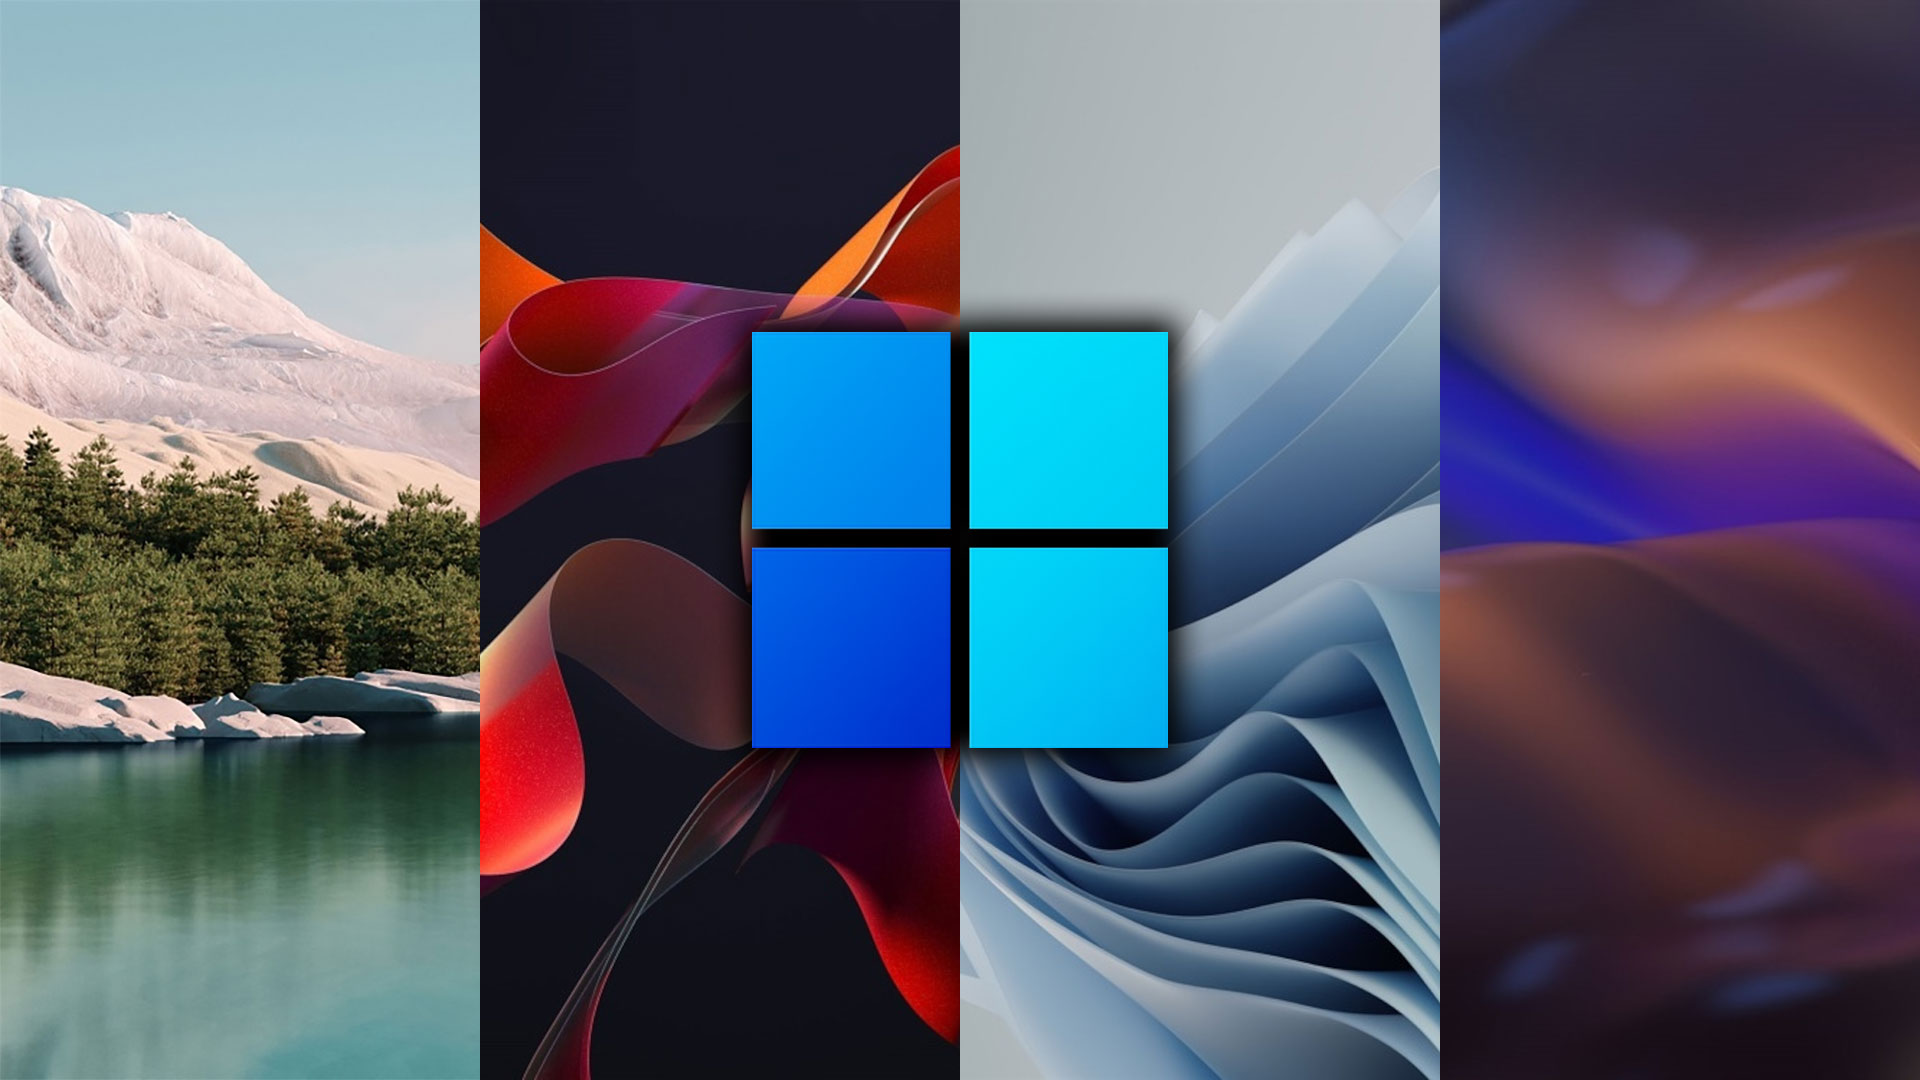 Windows 11: download the official wallpapers | Download 